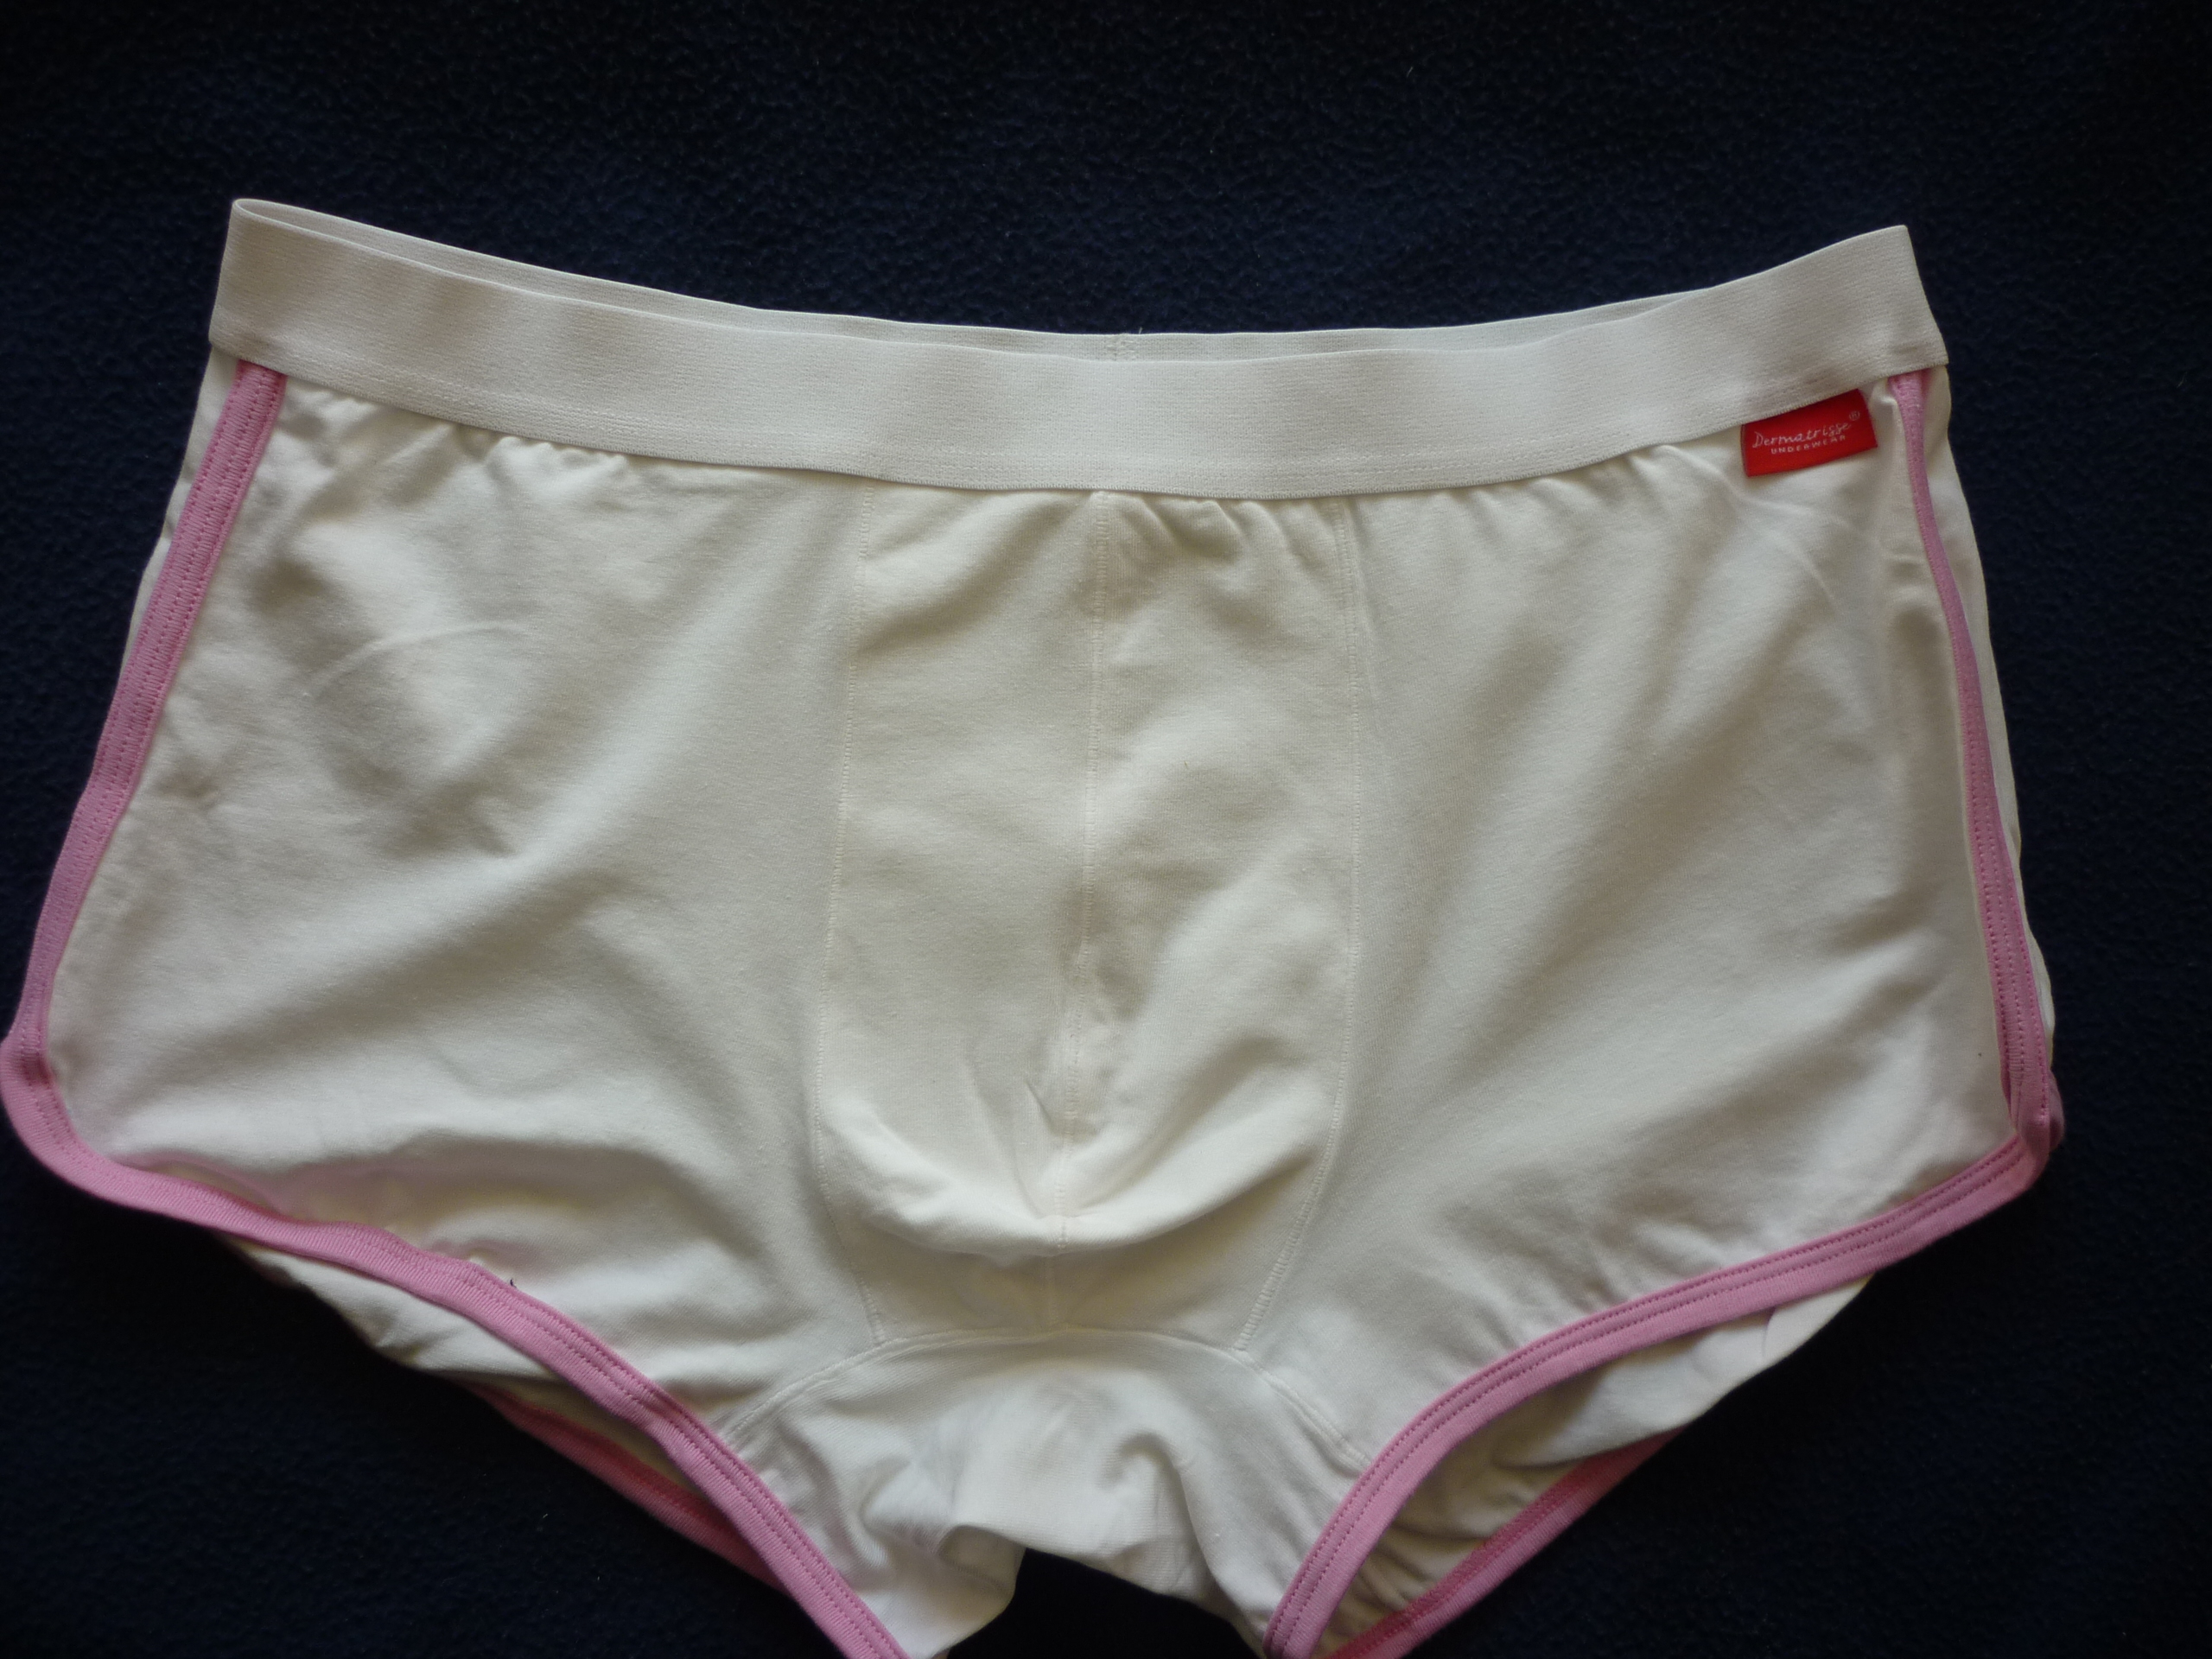 MEN'S UNDERWEAR (BRIEF) II GUARANTEED TOP QUALITY II OFF WHITE WITH PINK LININGIIDON'T MISS THIS CHANCE-3 Pcs.II FREE HOME DELIVERY(POST NORD)IIDISCOUNT 35% IIART.No.190822-1060336